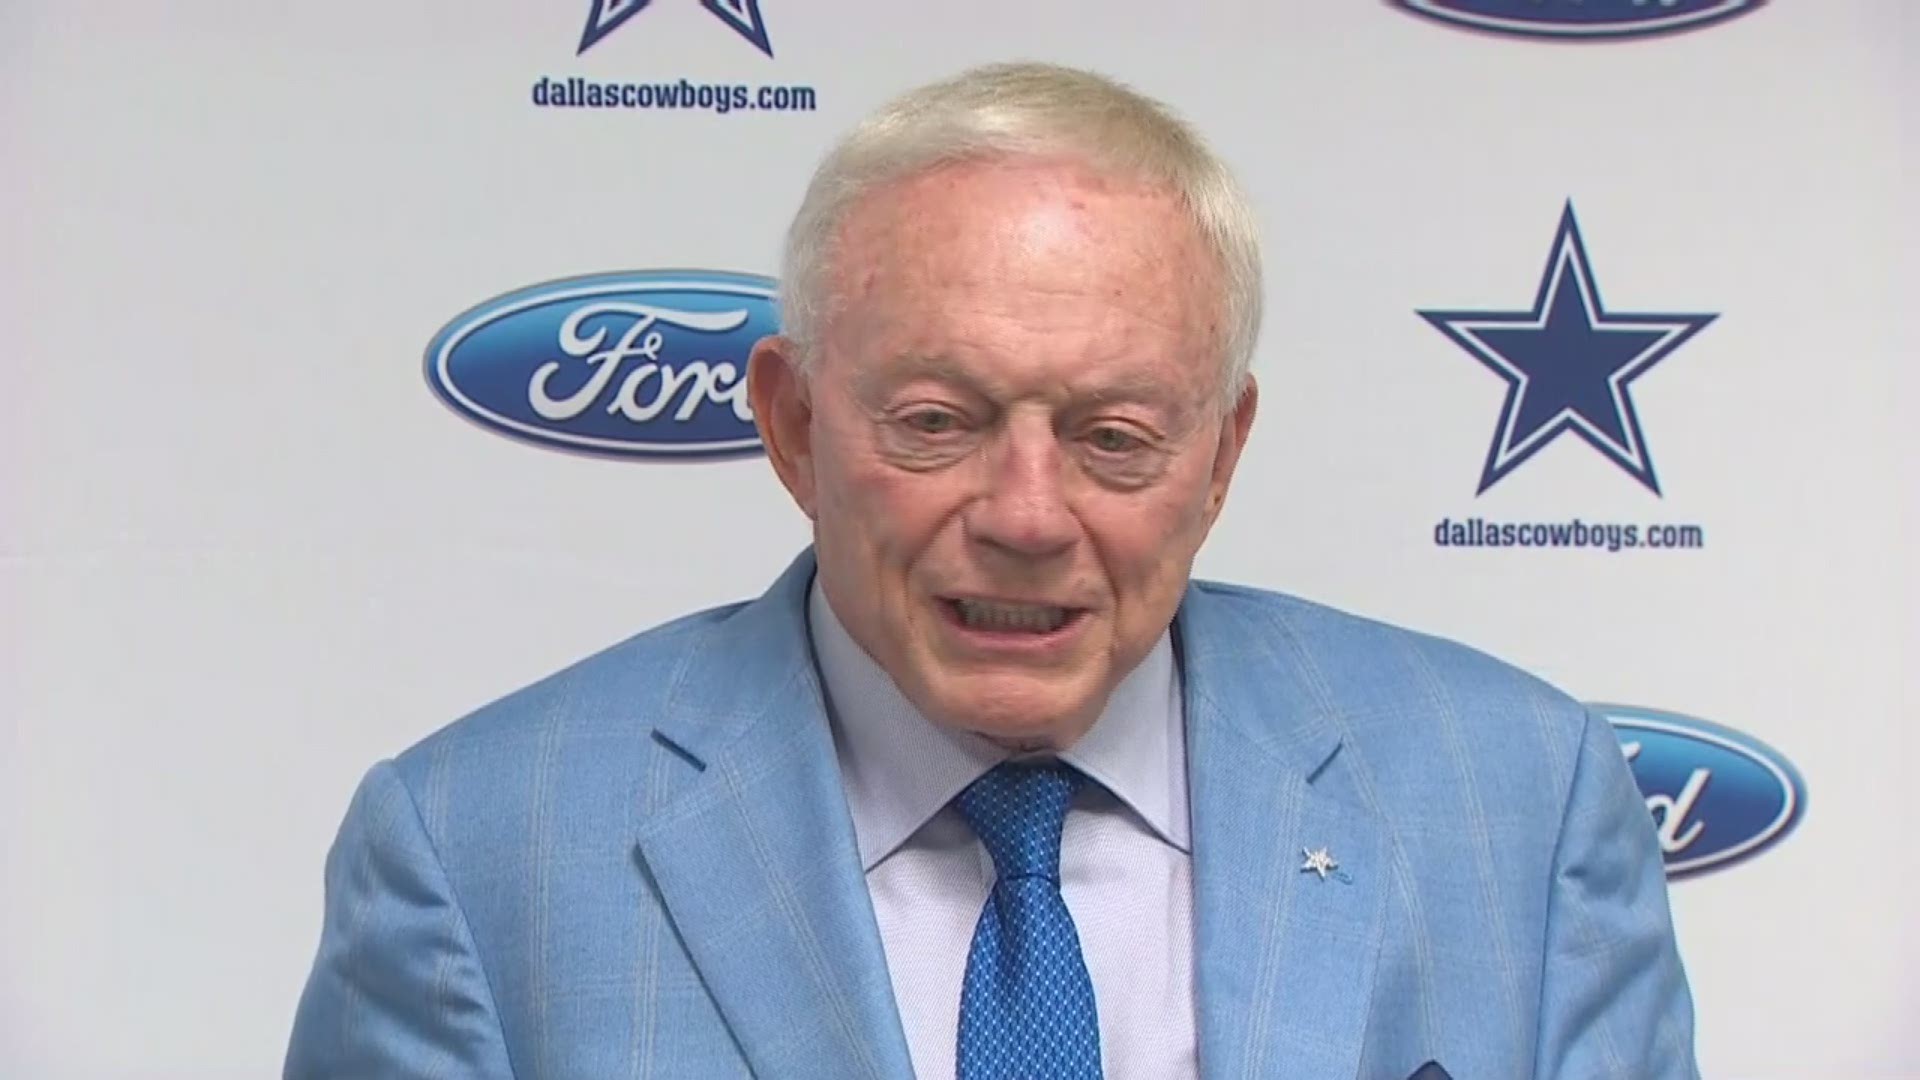 Jerry Jones addresses his team's decision to kneel before the national anthem and stand arm in arm during it Monday.